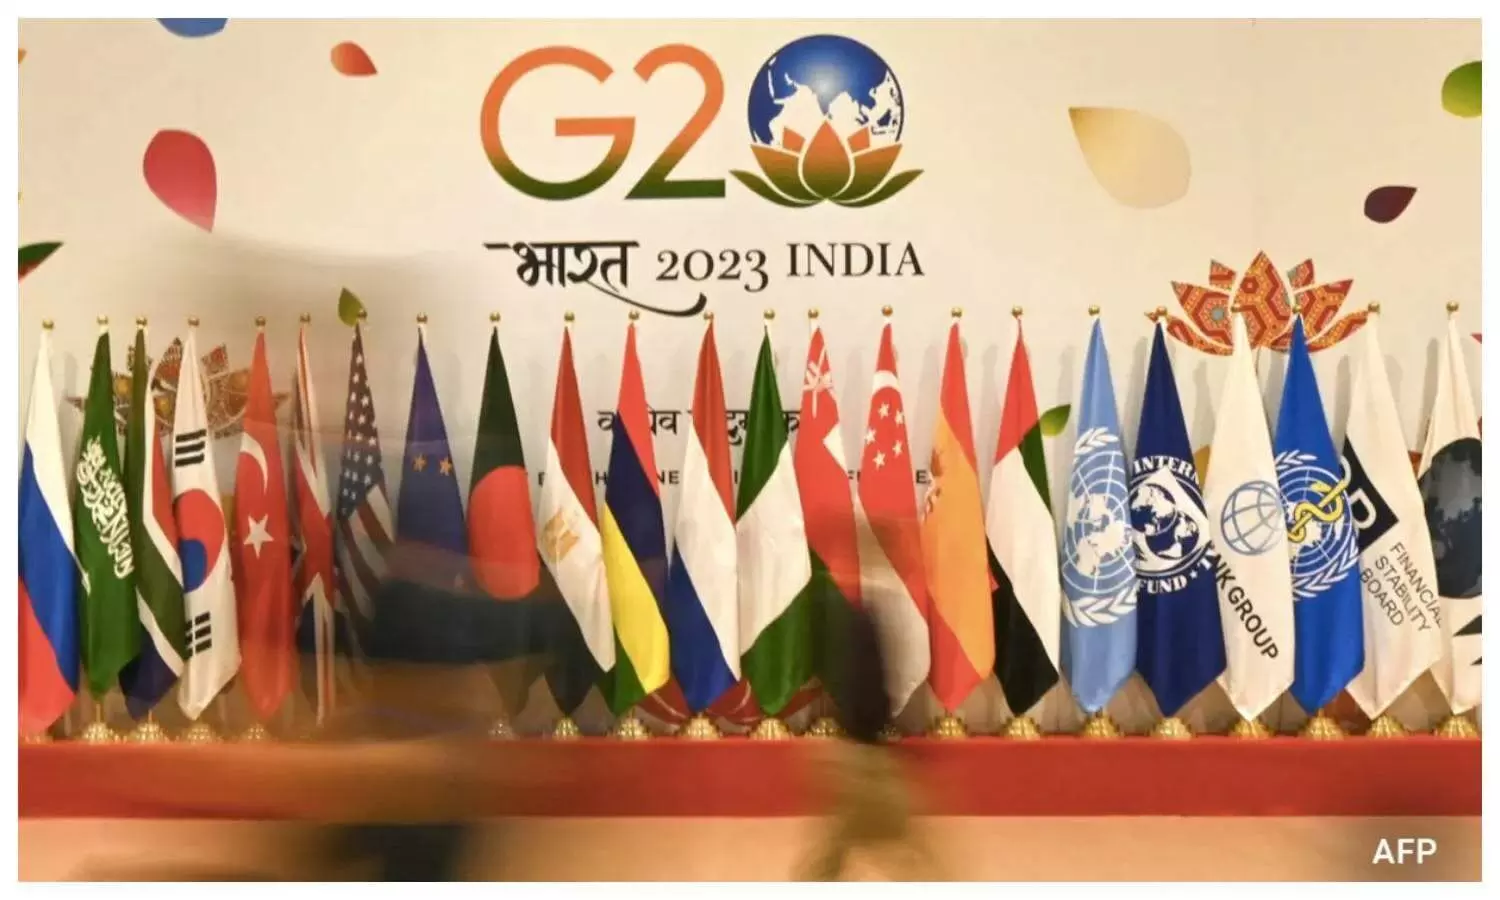 G20 Summit 2023 held in India Two major achievements